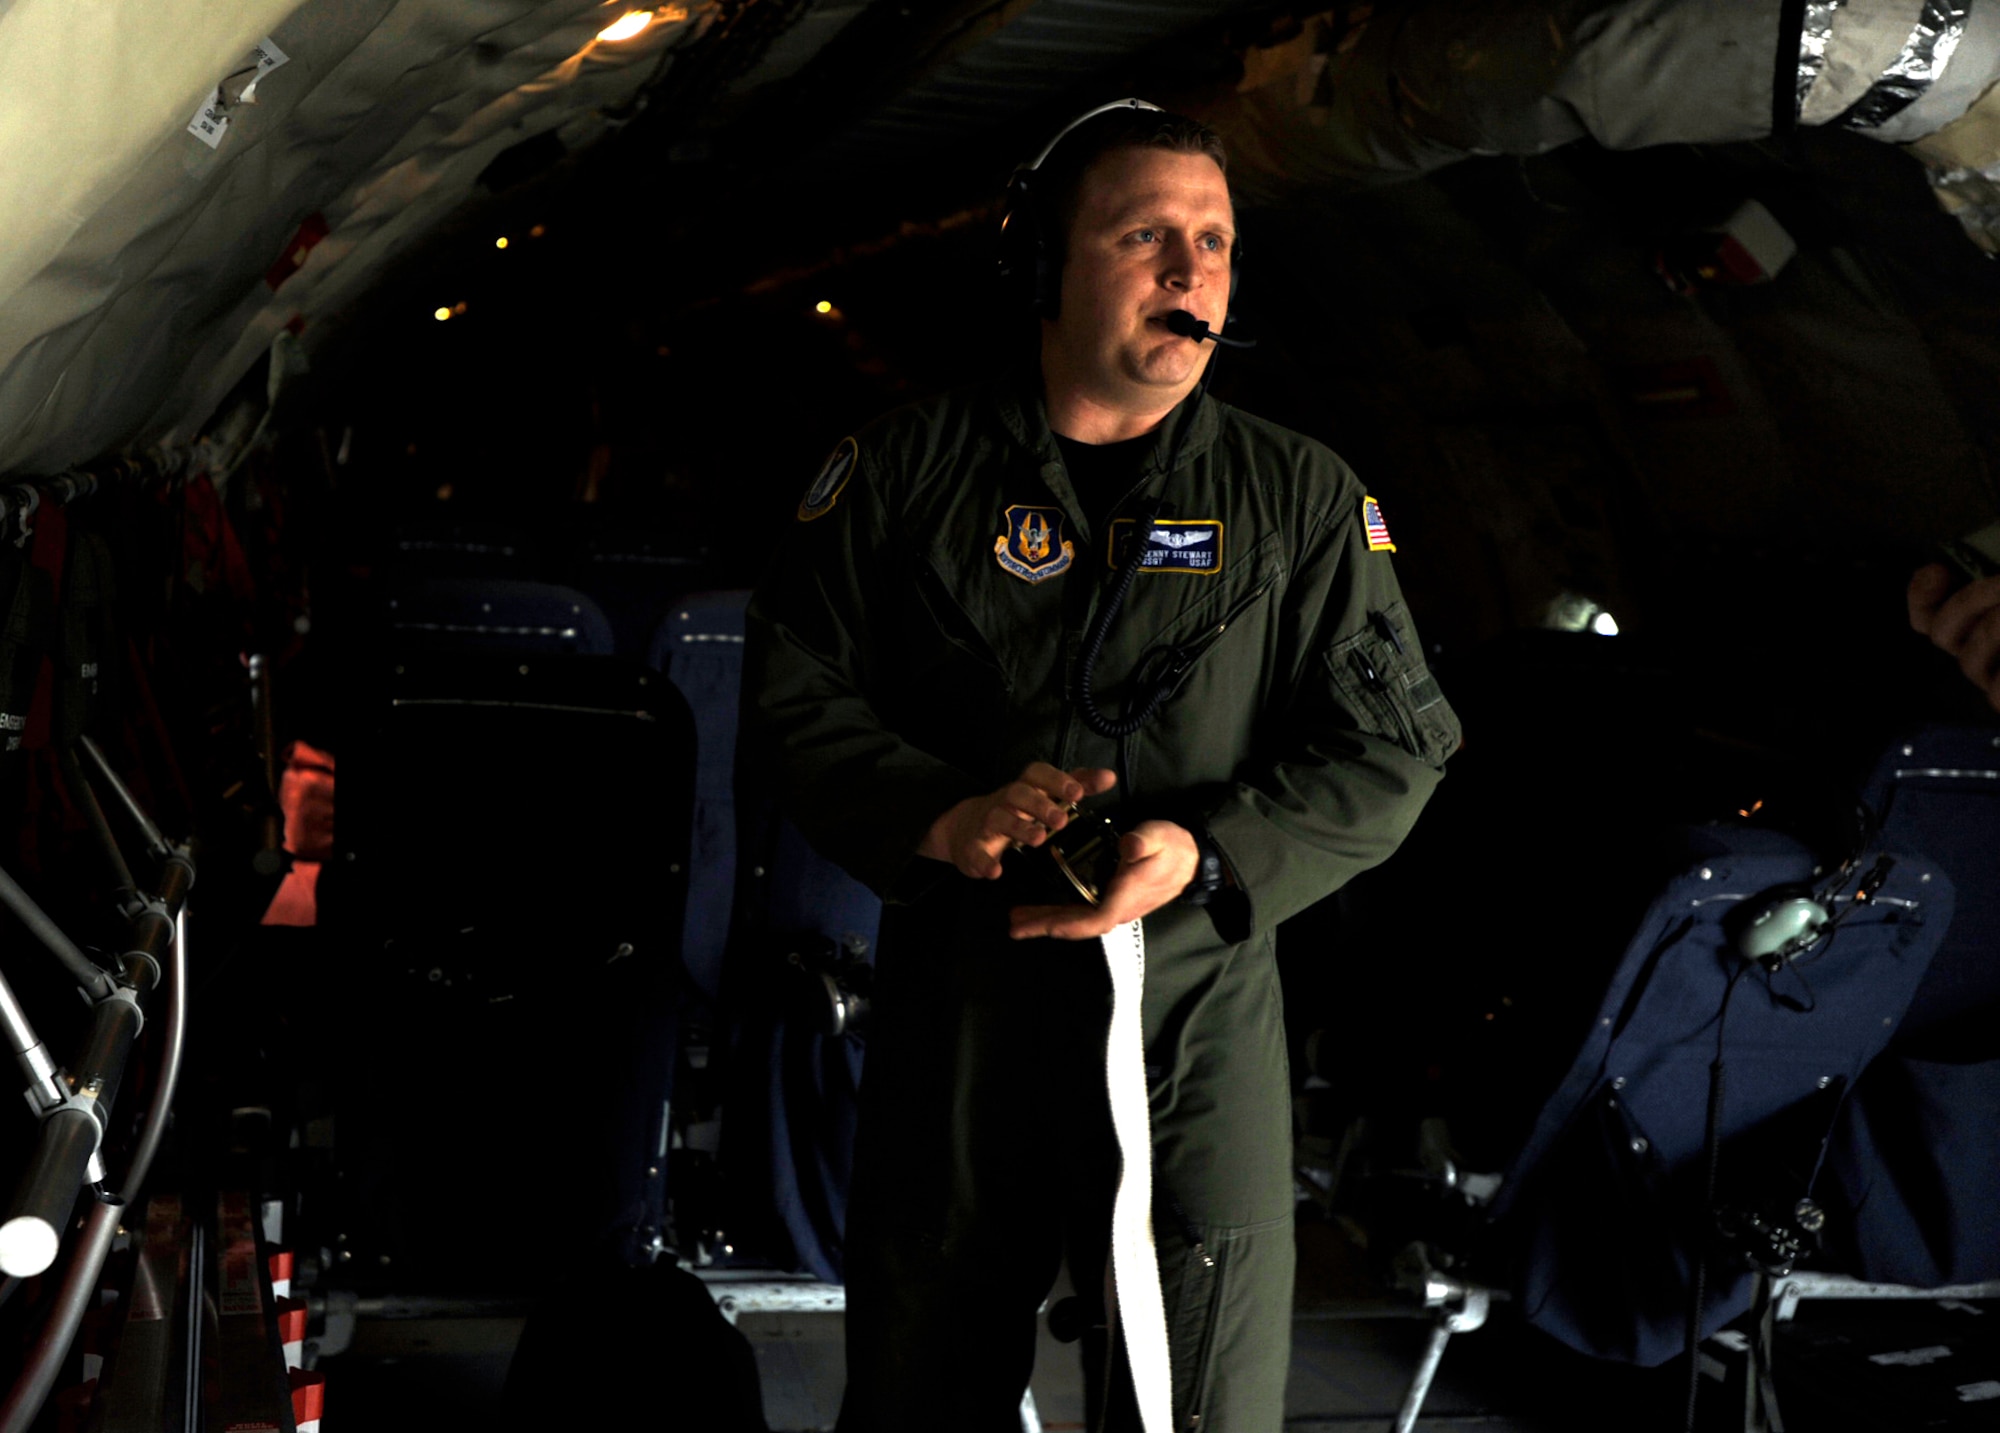 Staff Sgt. Kenny Stewart adjusts a tie-down strap aboard a KC-135 Stratotanker prior to leaving McConnell Air Force Base, Kan., for a three-day aeromedical evacuation training exercise Friday morning. Sergeant Stewart is a KC-135 boom operator assigned to the 18th Air Refueling Squadron, the flying unit of the 931st Air Refueling Group. The 931st is an Air Force Reserve unit at McConnell AFB. (U.S. Air Force photo/Tech. Sgt. Jason Schaap) 